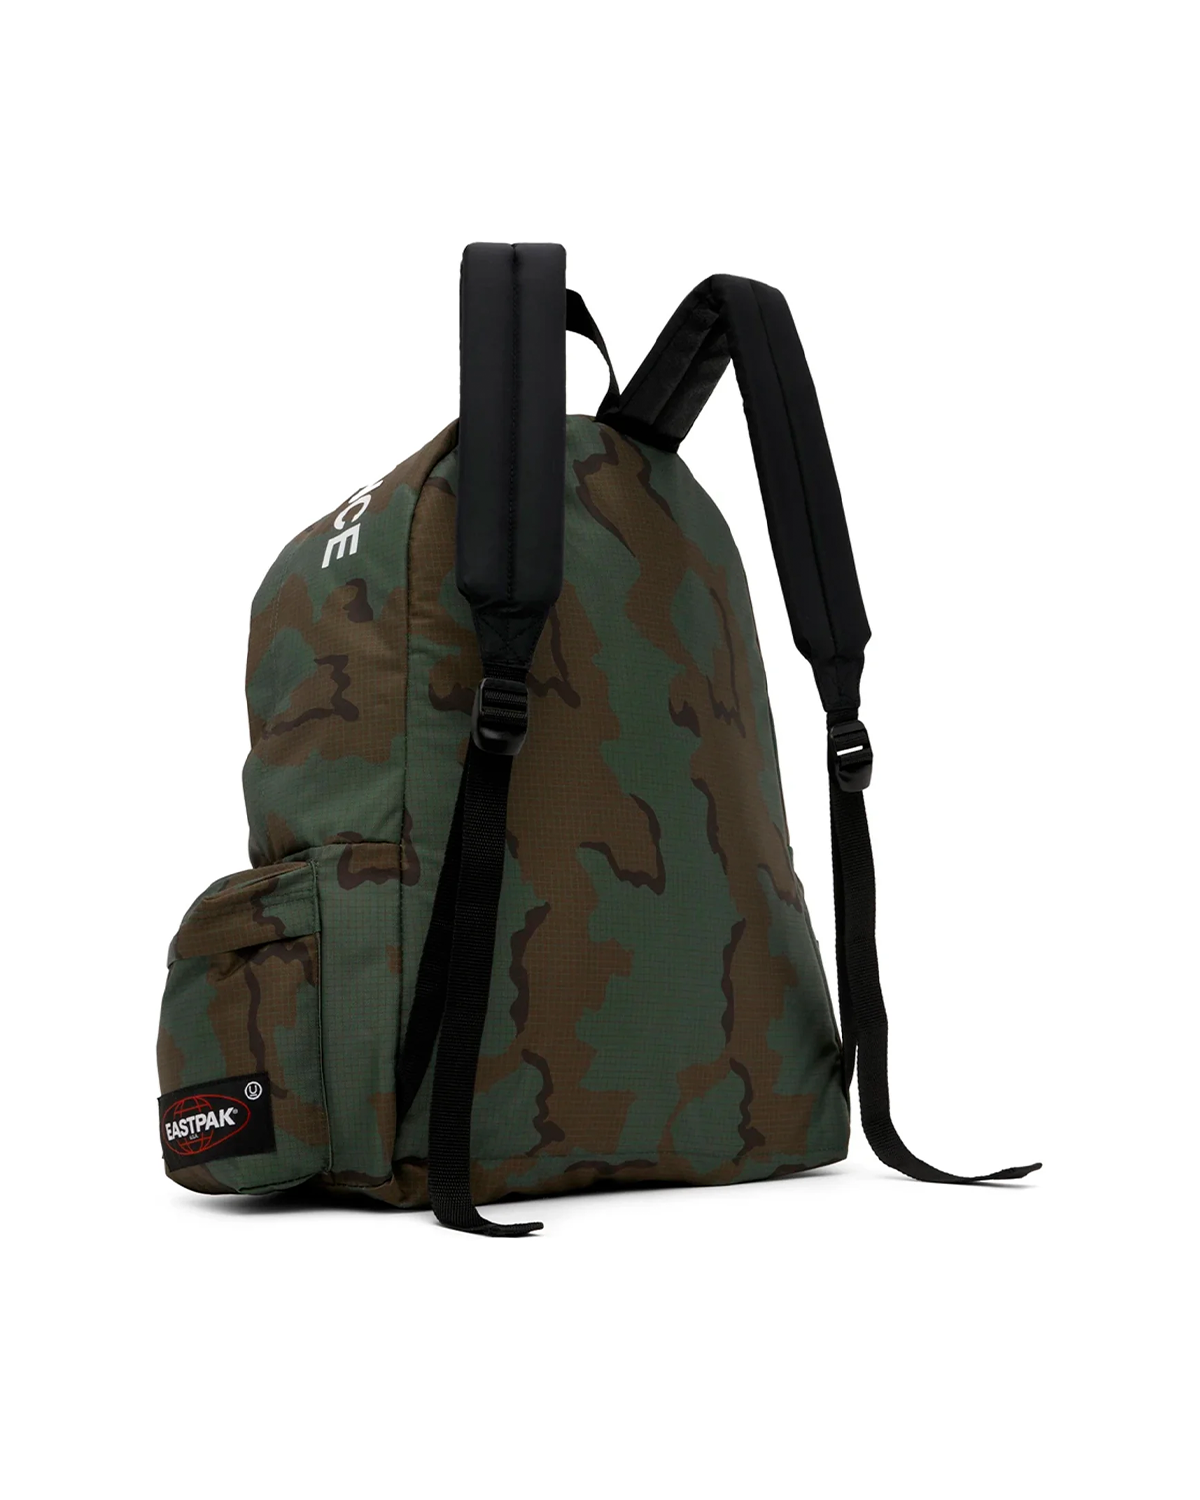 UNDERCOVER x Doubl'R Backpack Khaki Camo